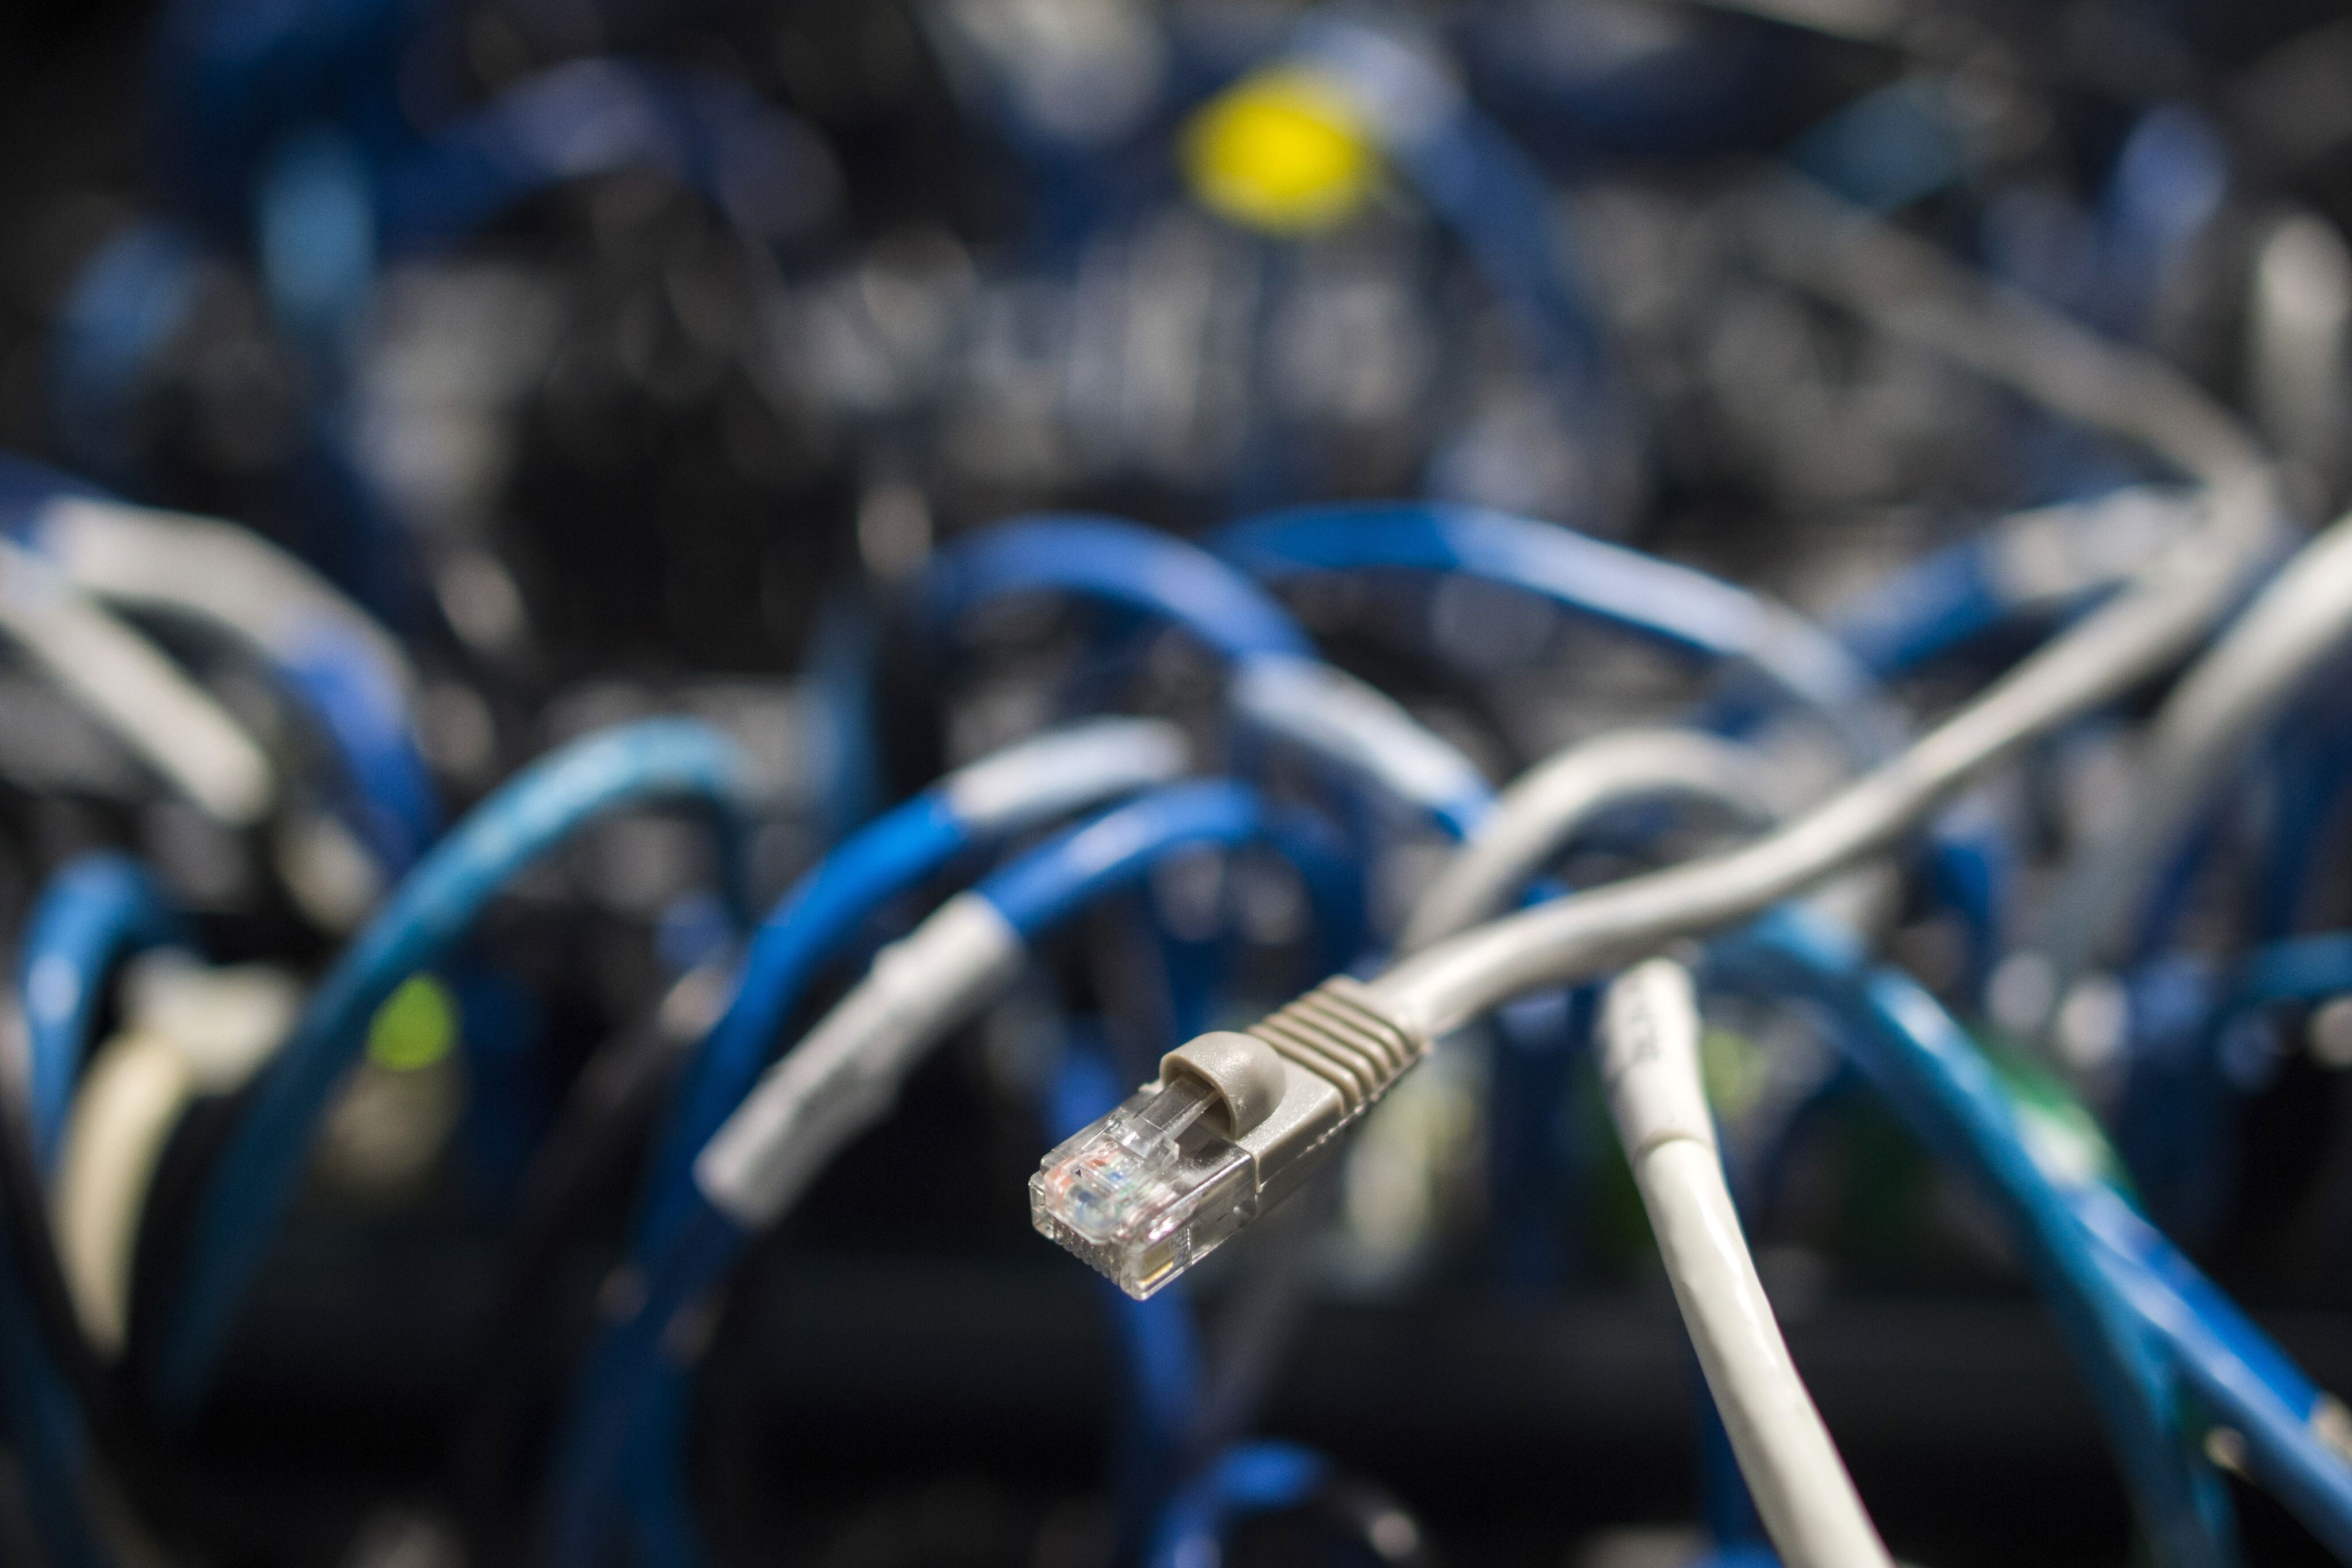 In this file photo network cables are seen going into a server in an office building in Washington, DC. Photo: AFP